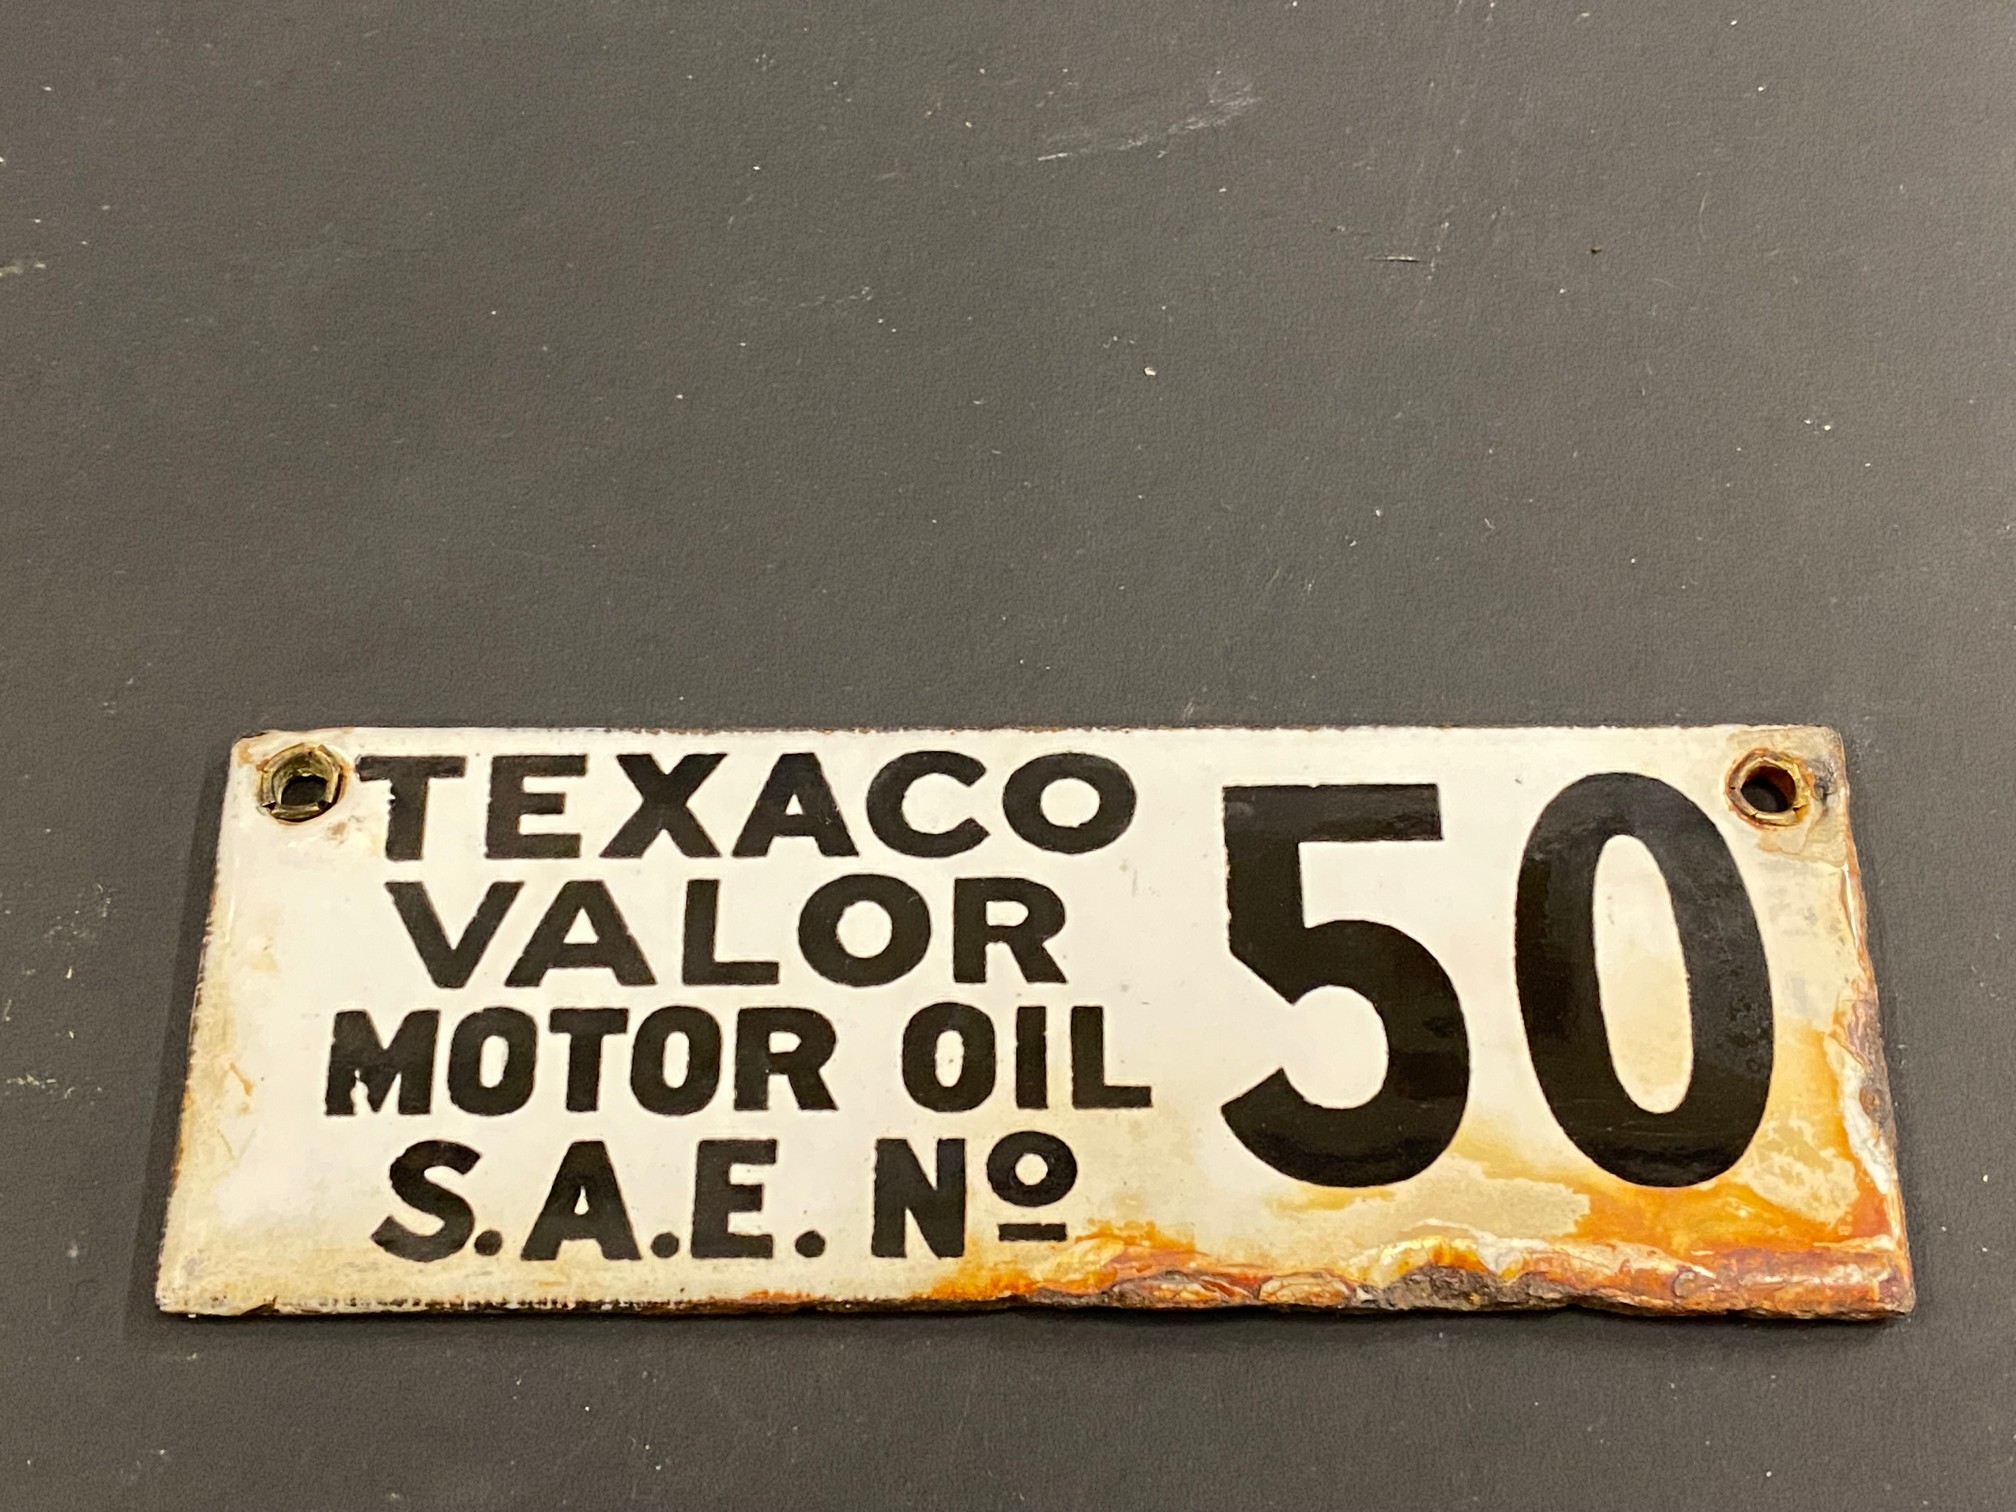 A small double sided enamel brand plaque for Texaco Valor Motor Oil, 4 x 1 1/2".